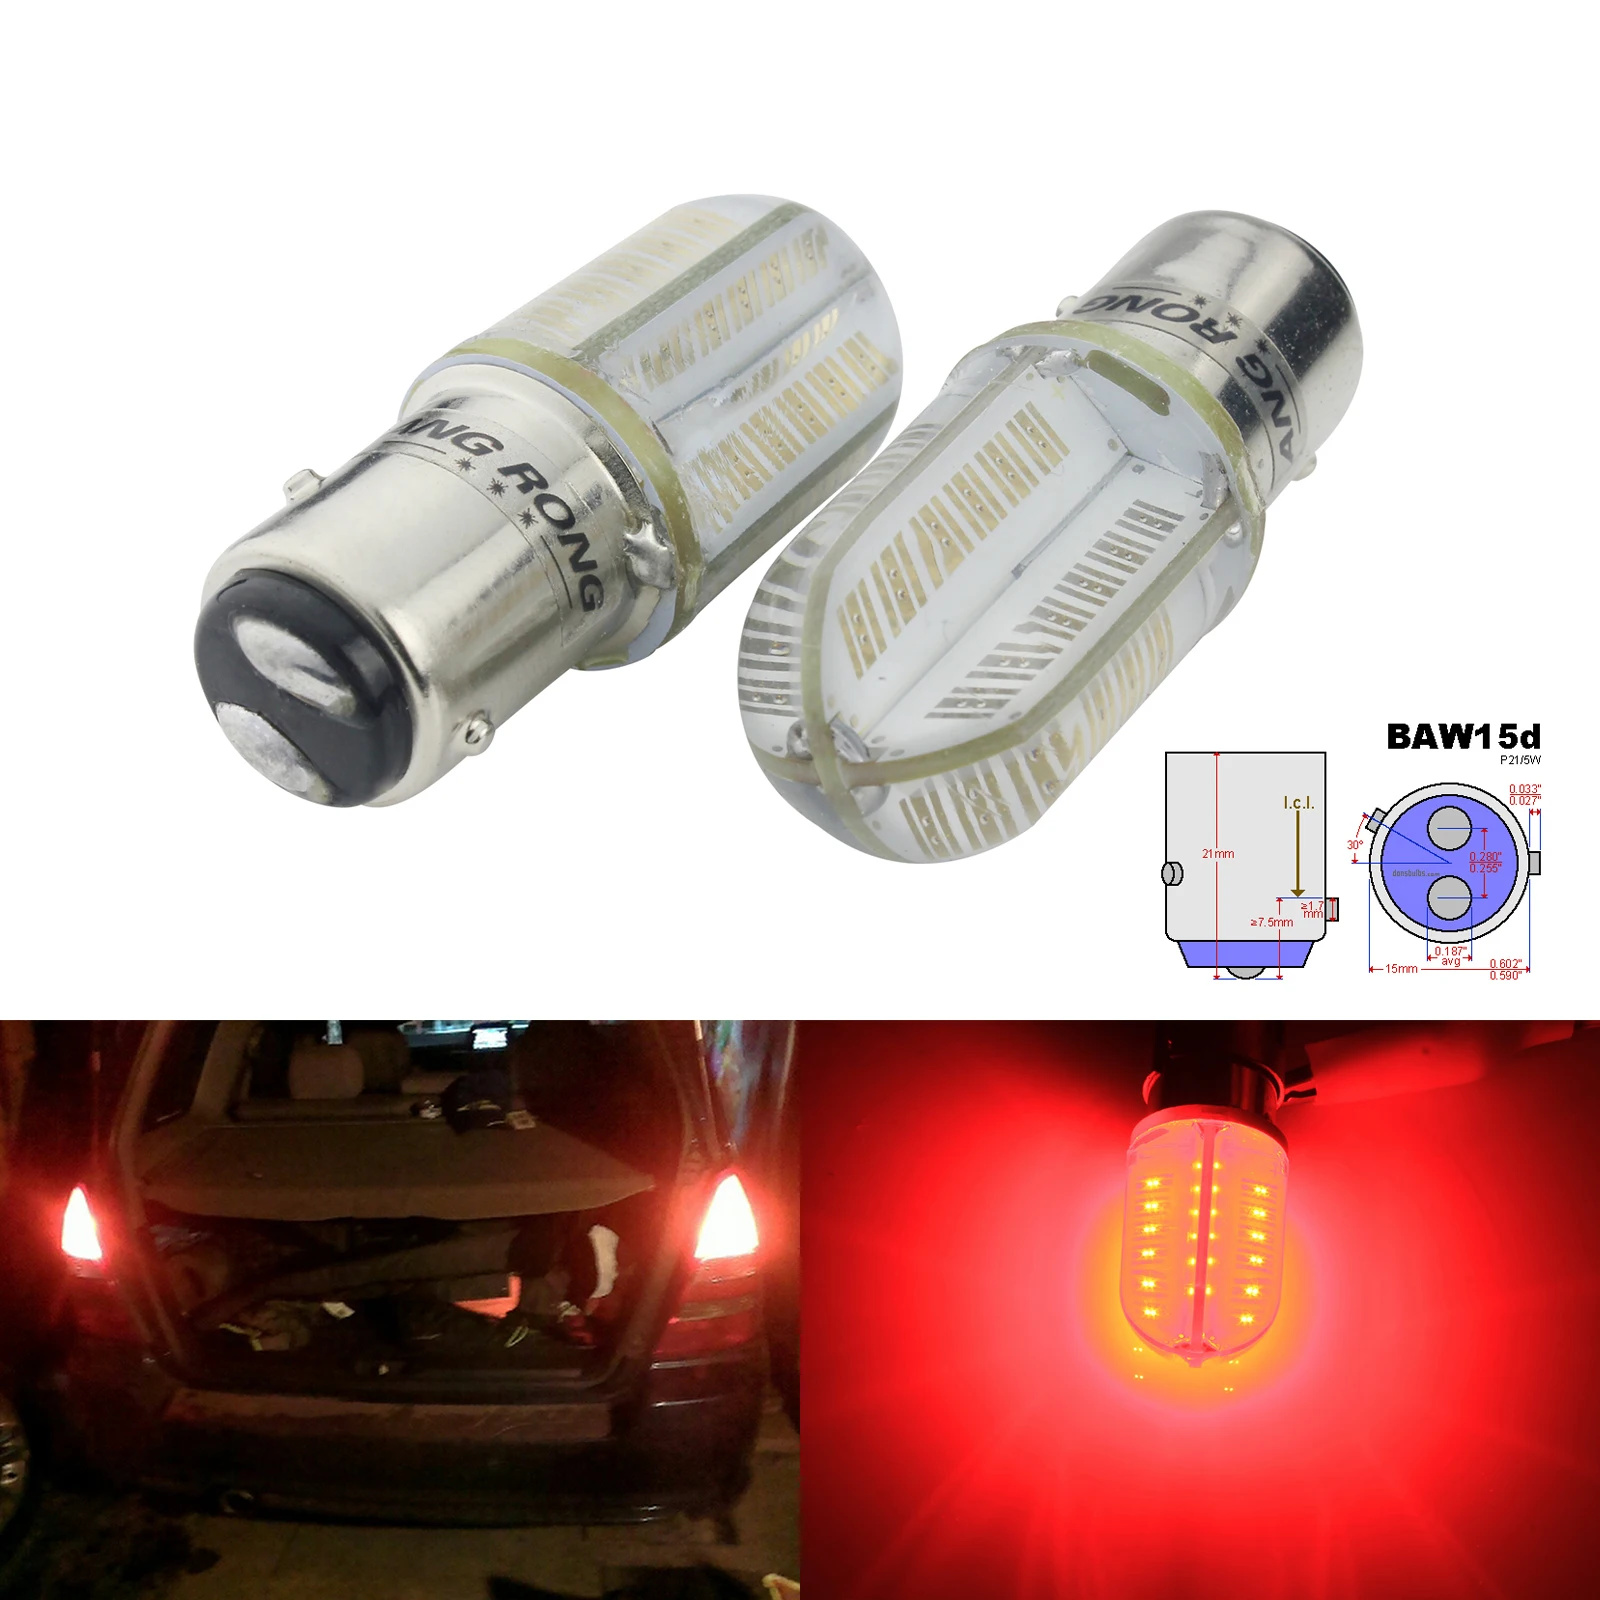 

ANGRONG 2x 567 PR21/5W BAW15d Red COB LED Bulbs Rear Tail Brake Stop Light Lamp 12V For Ford